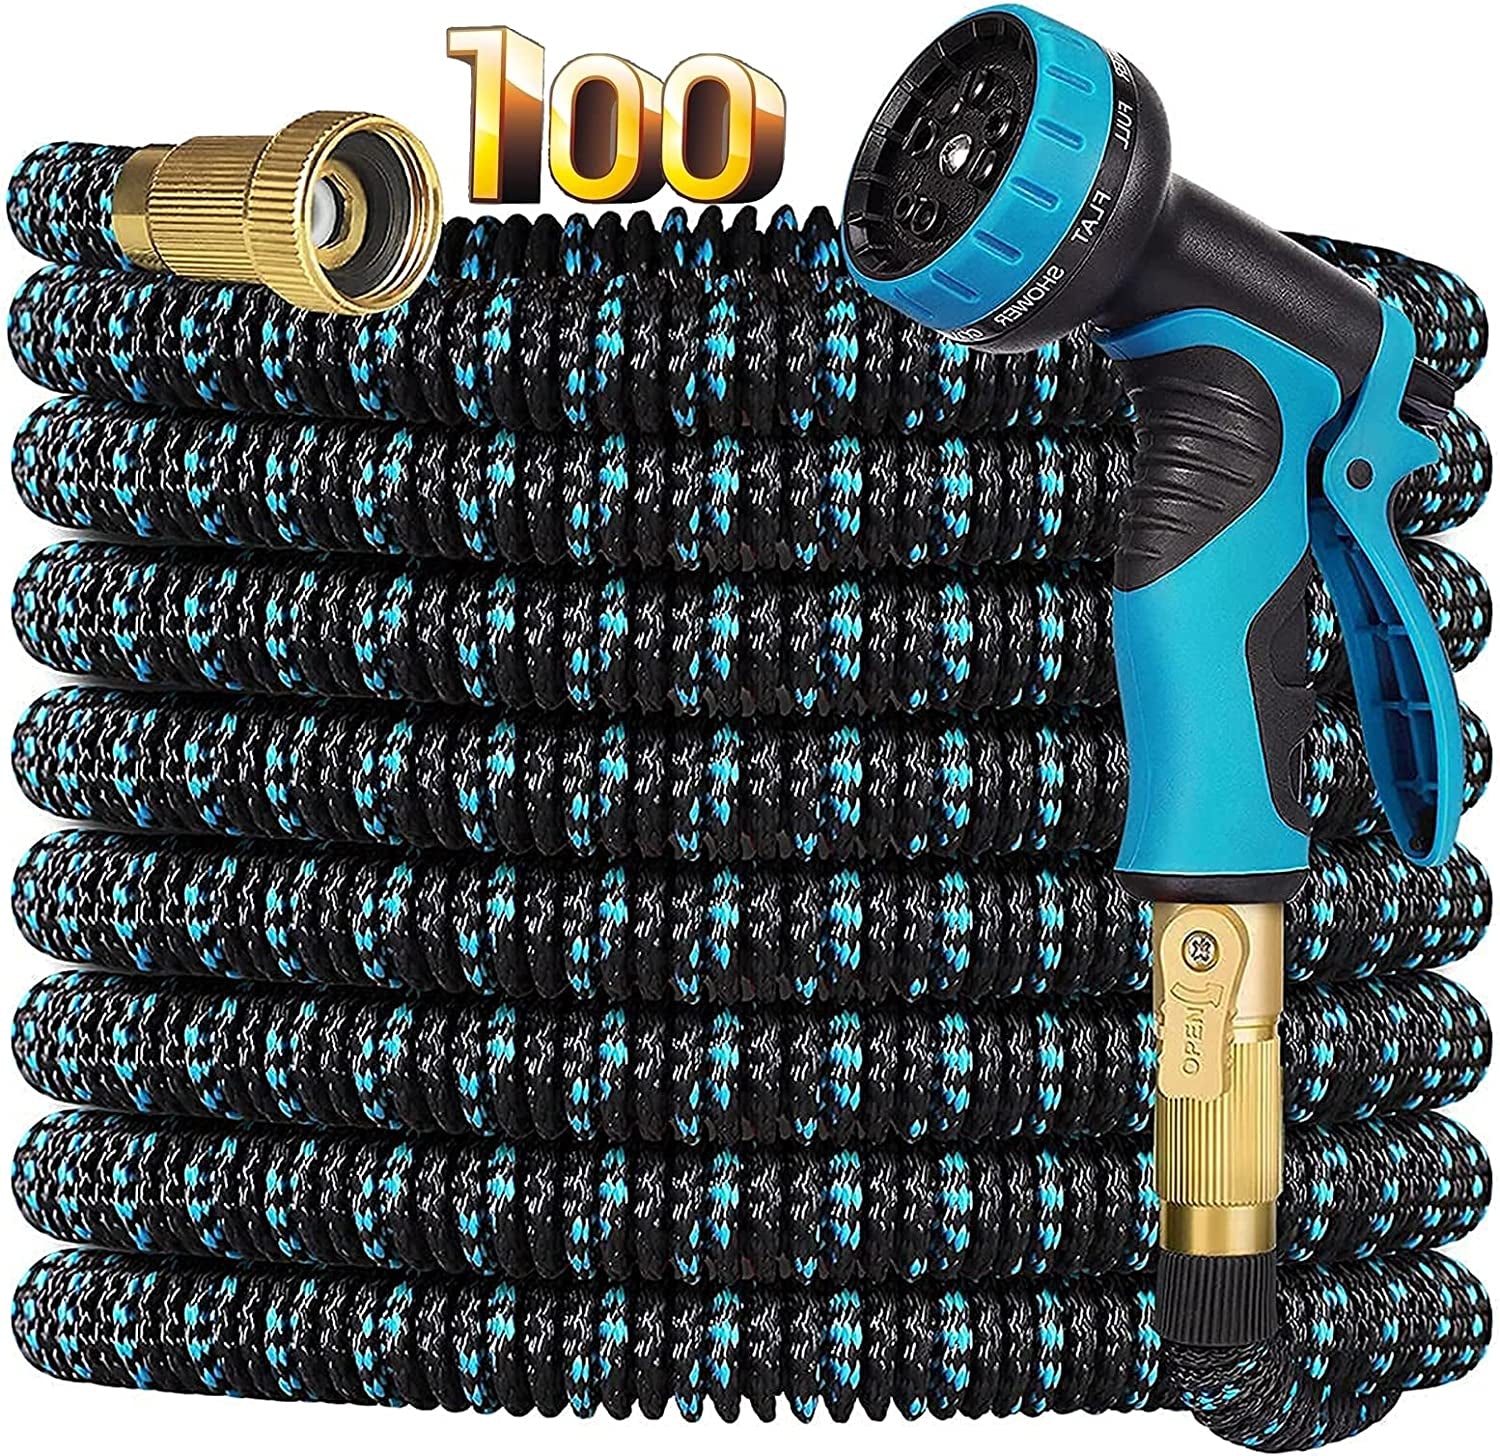 Wuciray, Garden Hose Expandable, Wuciray 100Ft(30M) Retractable Water Hose with 10 Function Spray Gun, 3/4" Solid Extra-Strong Solid Brass Connectors, High Pressure Garden Hoses Set with Durable 3-Layers Latex